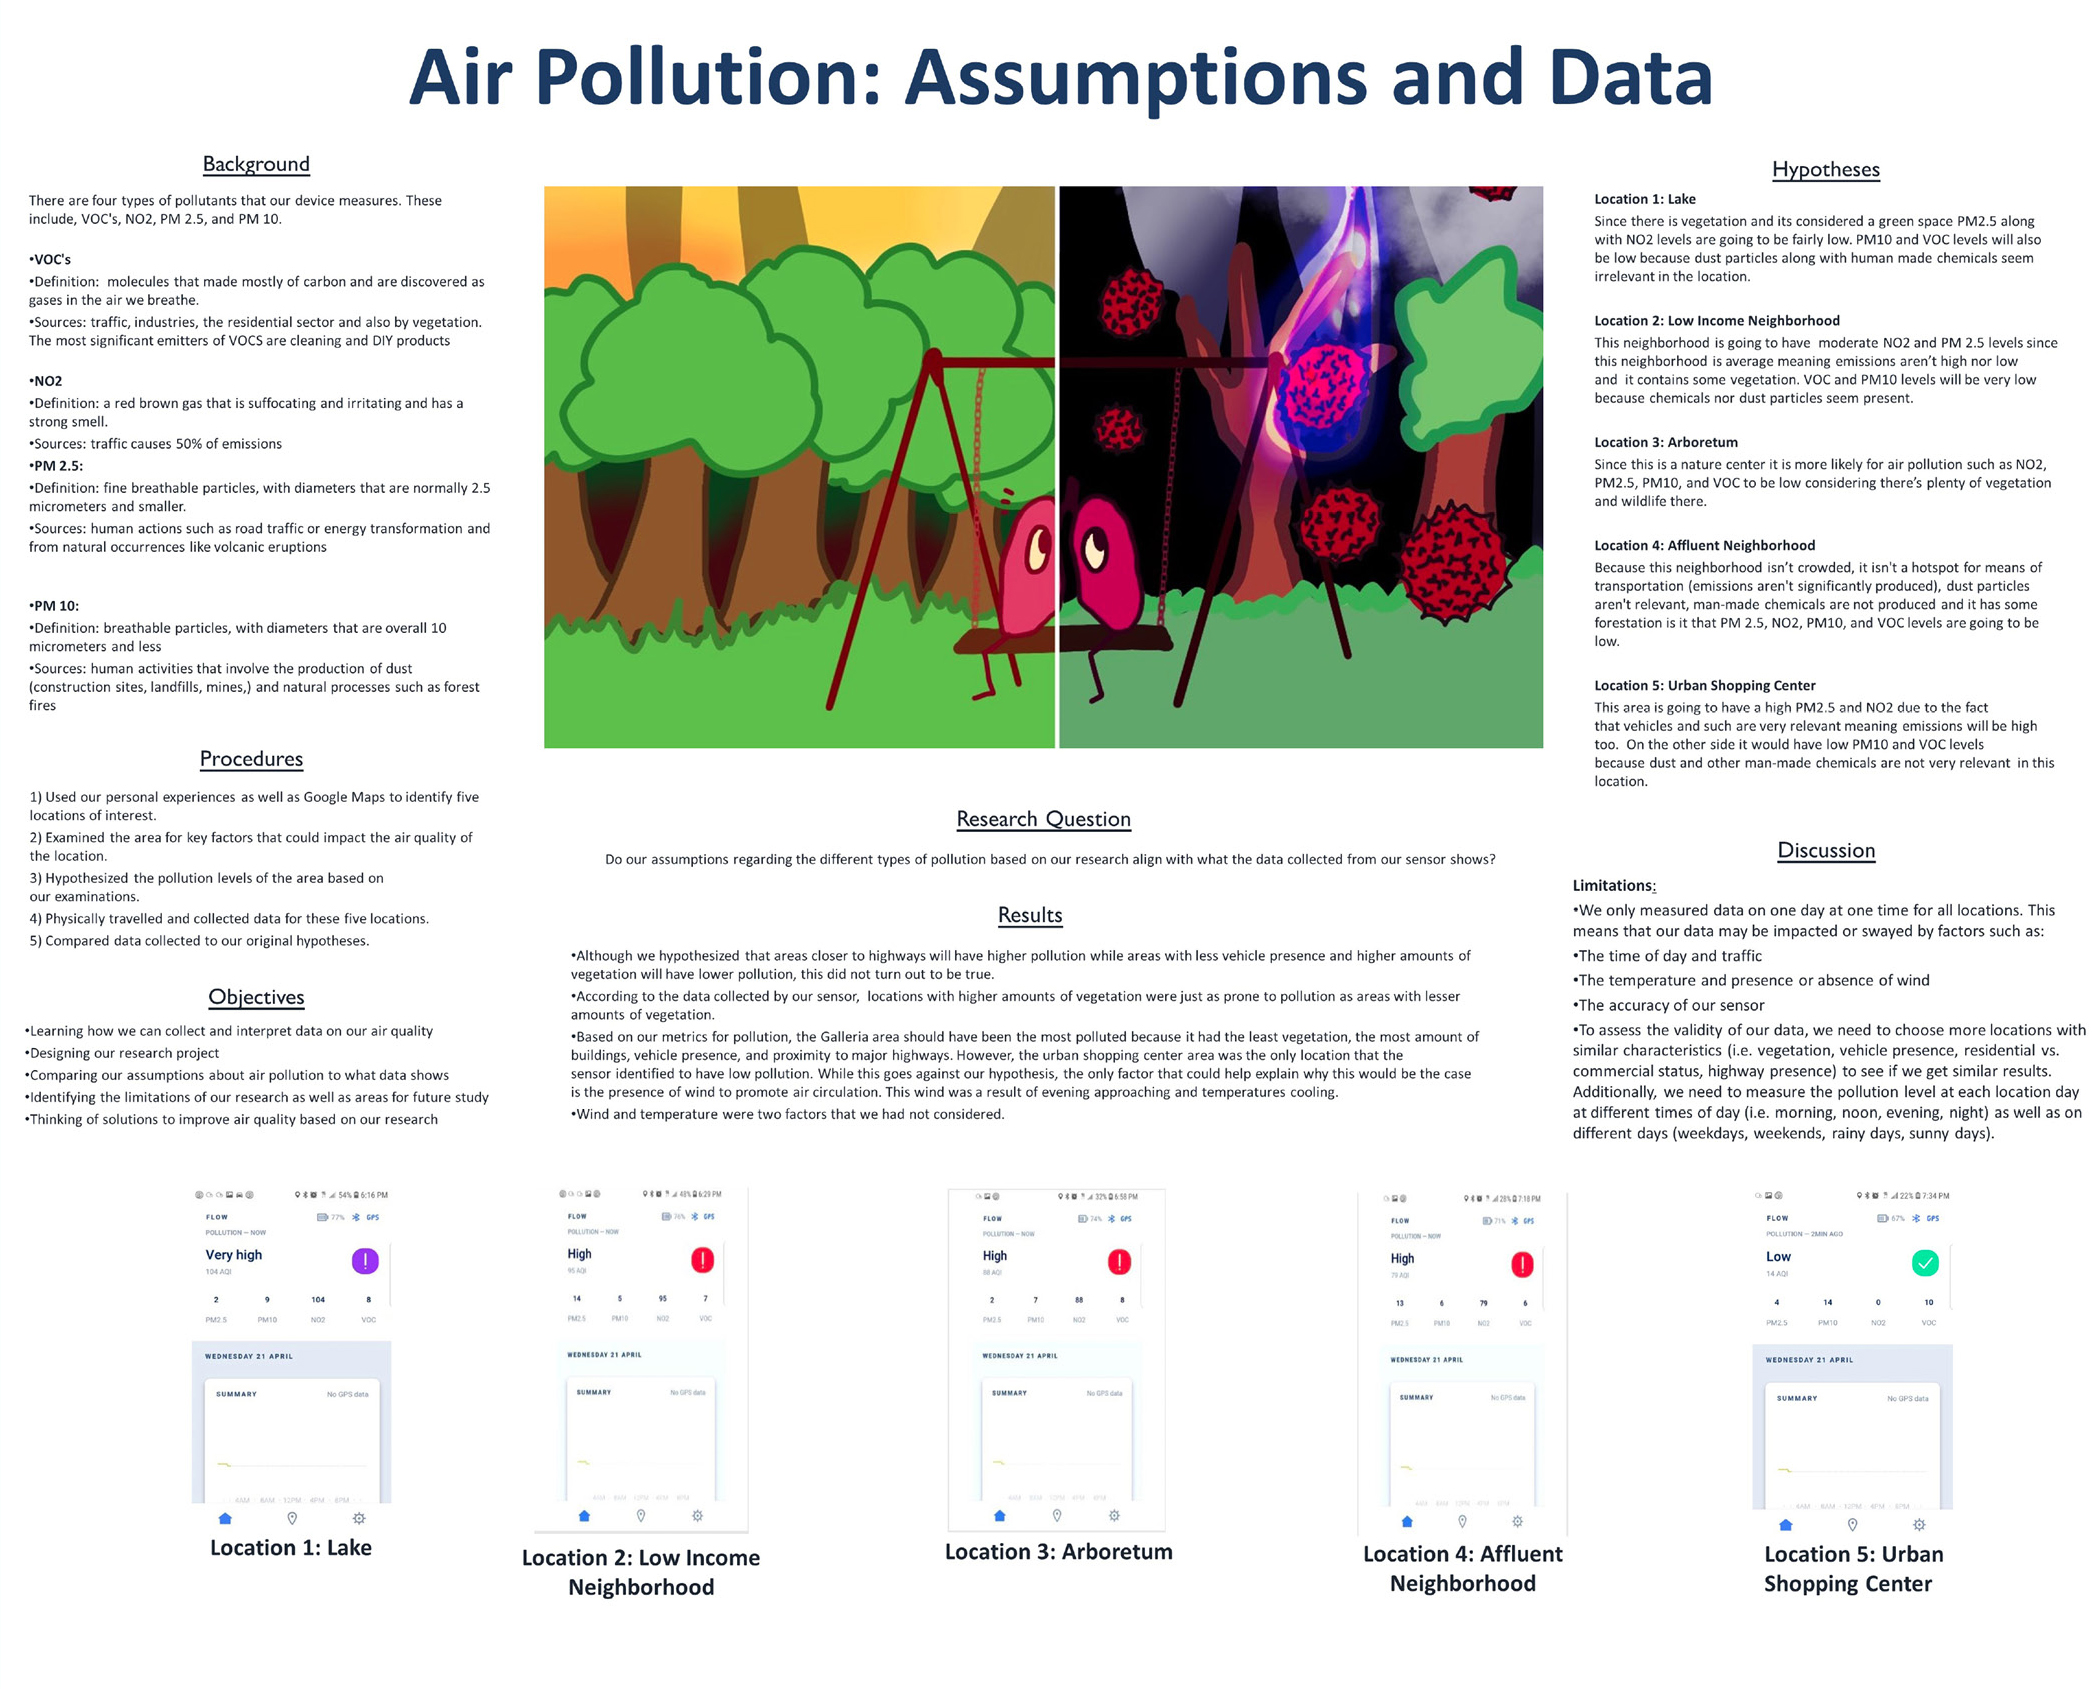 Figure 2 air pollution: assumptions and data